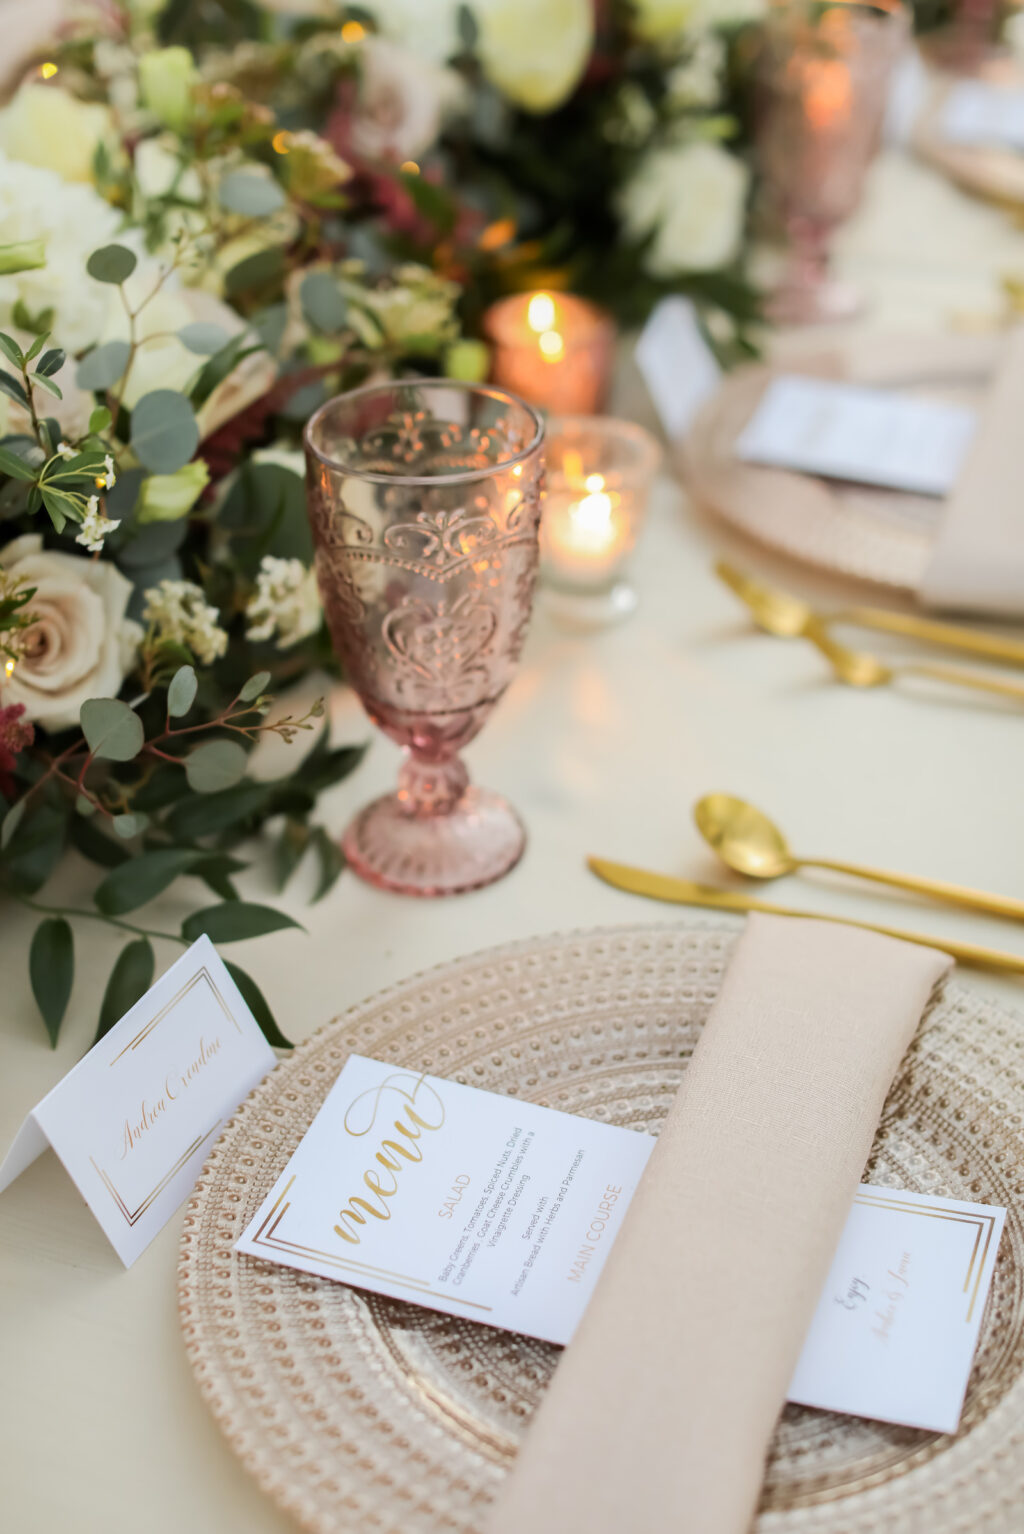 Romantic Pink and White Wedding Reception Decor, Gold Beaded Charger, Taupe Linen Napkin, Gold Flatware, Pink Vintage Glassware | Tampa Bay Wedding Photographer Lifelong Photography Studio | Wedding Planner Special Moments Event Planning | Wedding Rentals Kate Ryan Event Rentals